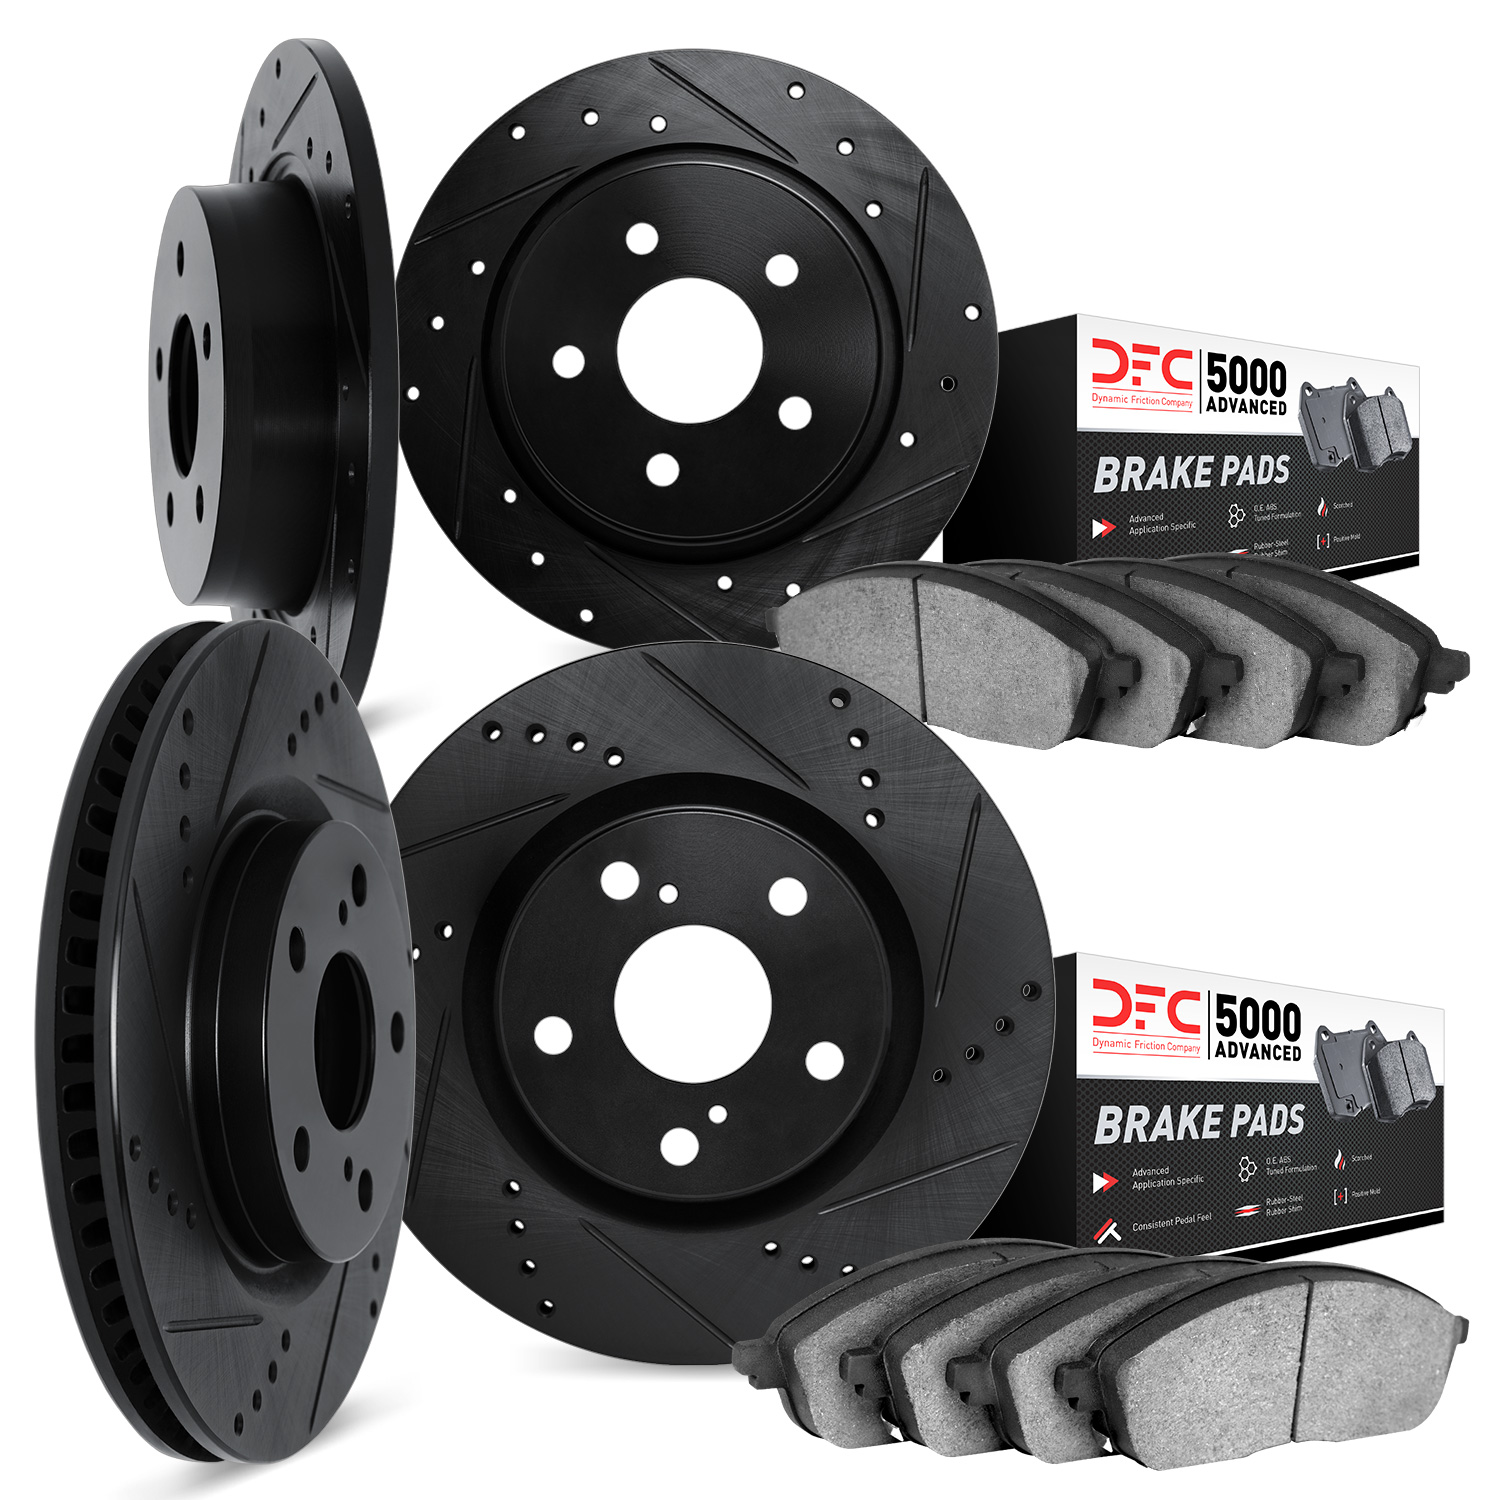 8504-59057 Drilled/Slotted Brake Rotors w/5000 Advanced Brake Pads Kit [Black], 2020-2021 Acura/Honda, Position: Front and Rear